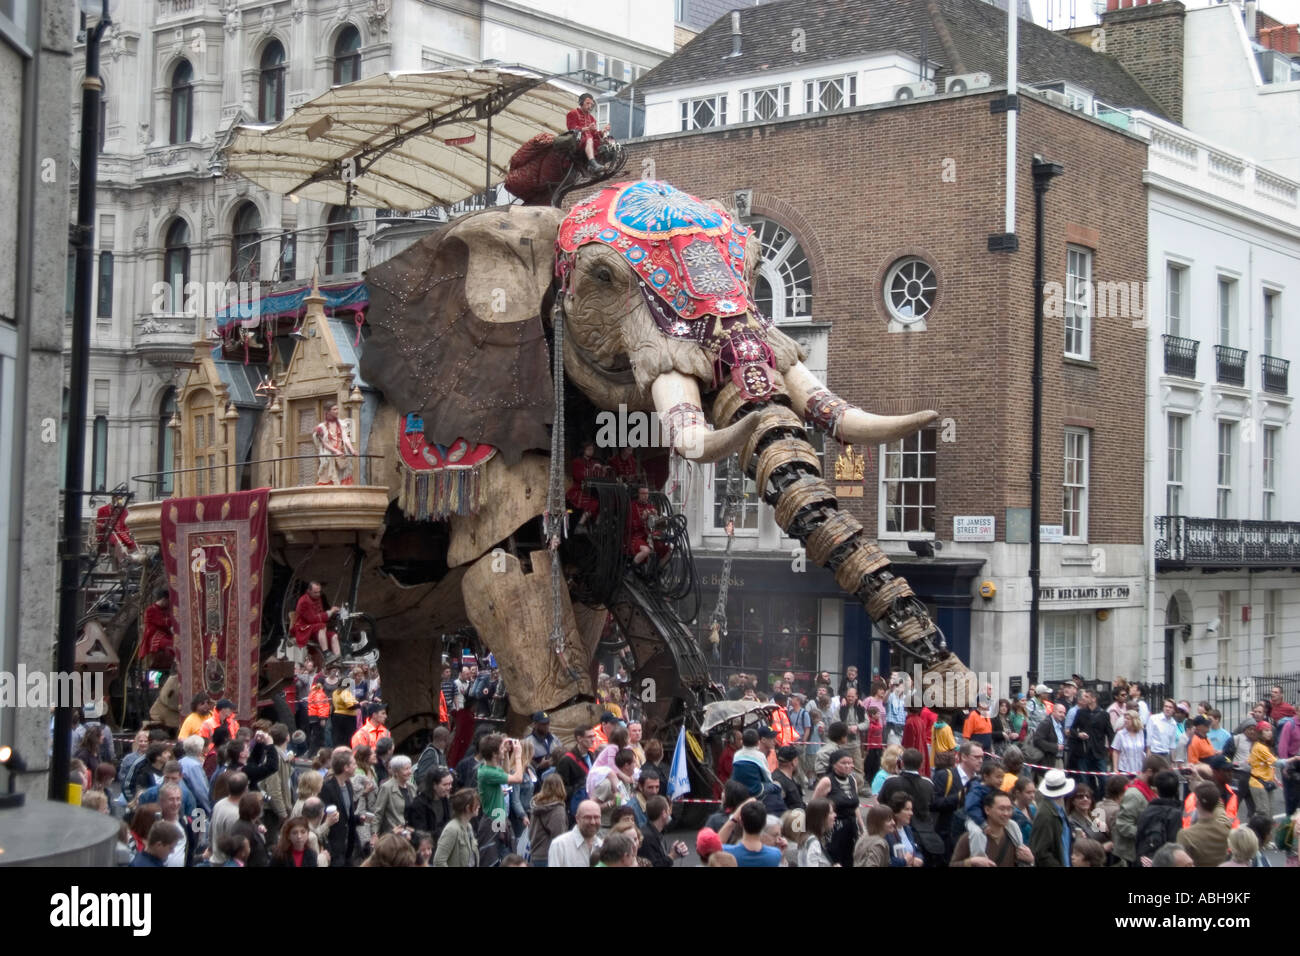 The Sultan's Elephant street theatre by Royal De Luxe in St James's Street, London, England Stock Photo